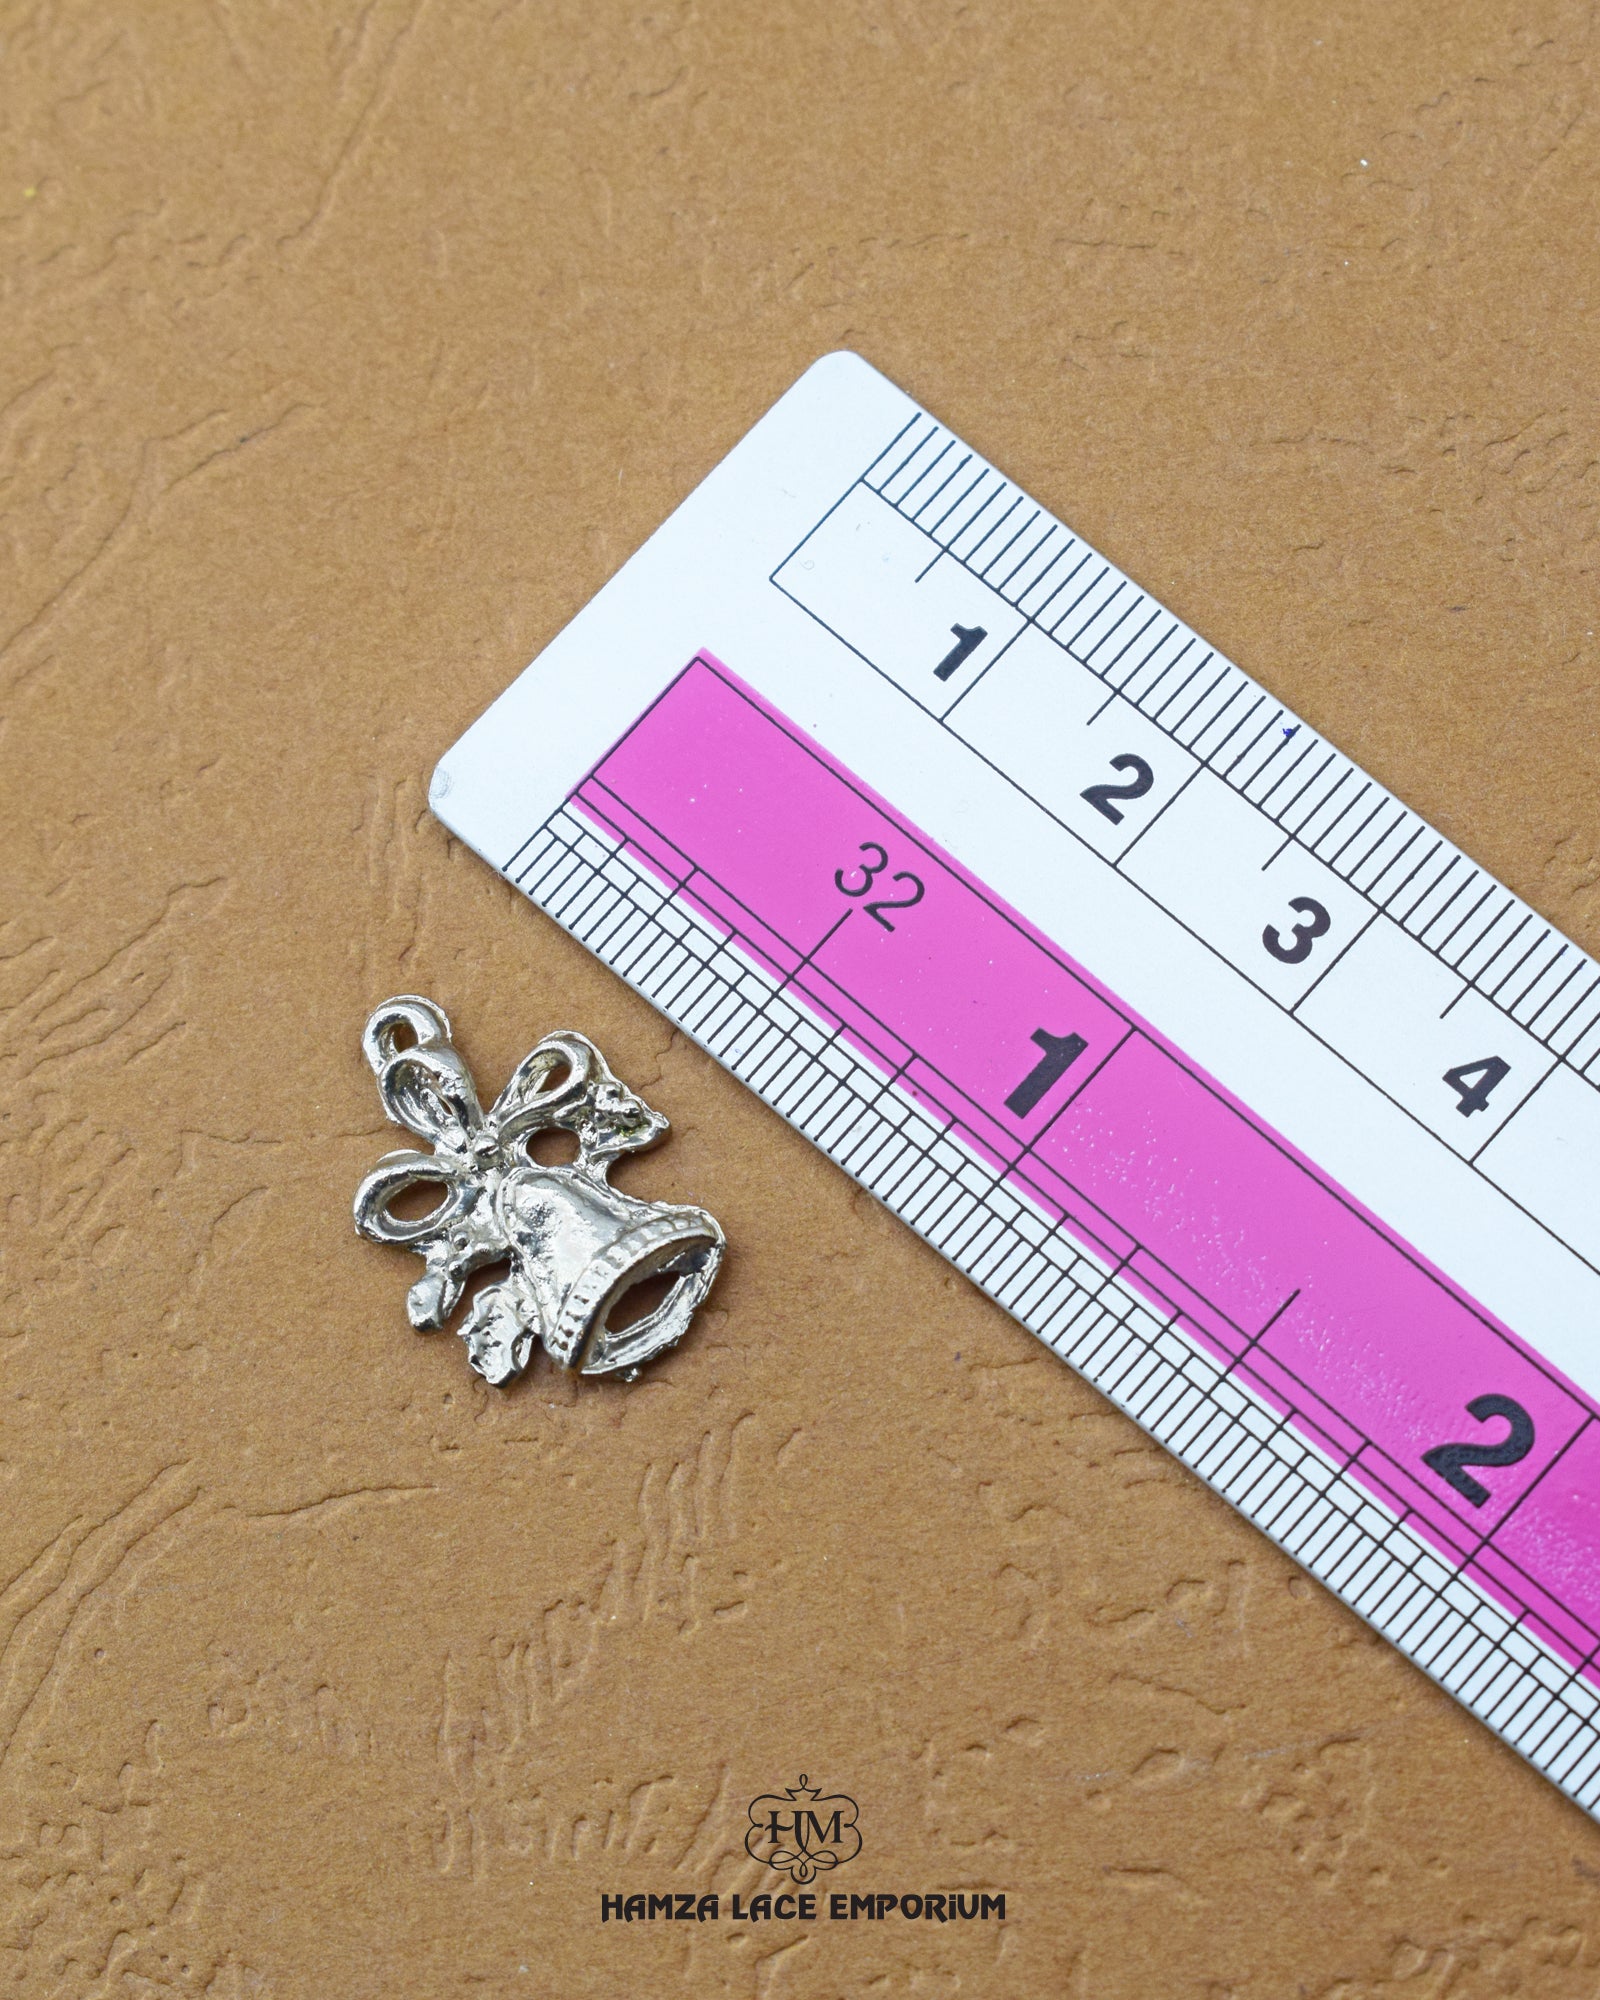 The 'Fancy Button MA8' size is showcased using a ruler for precise measurement.